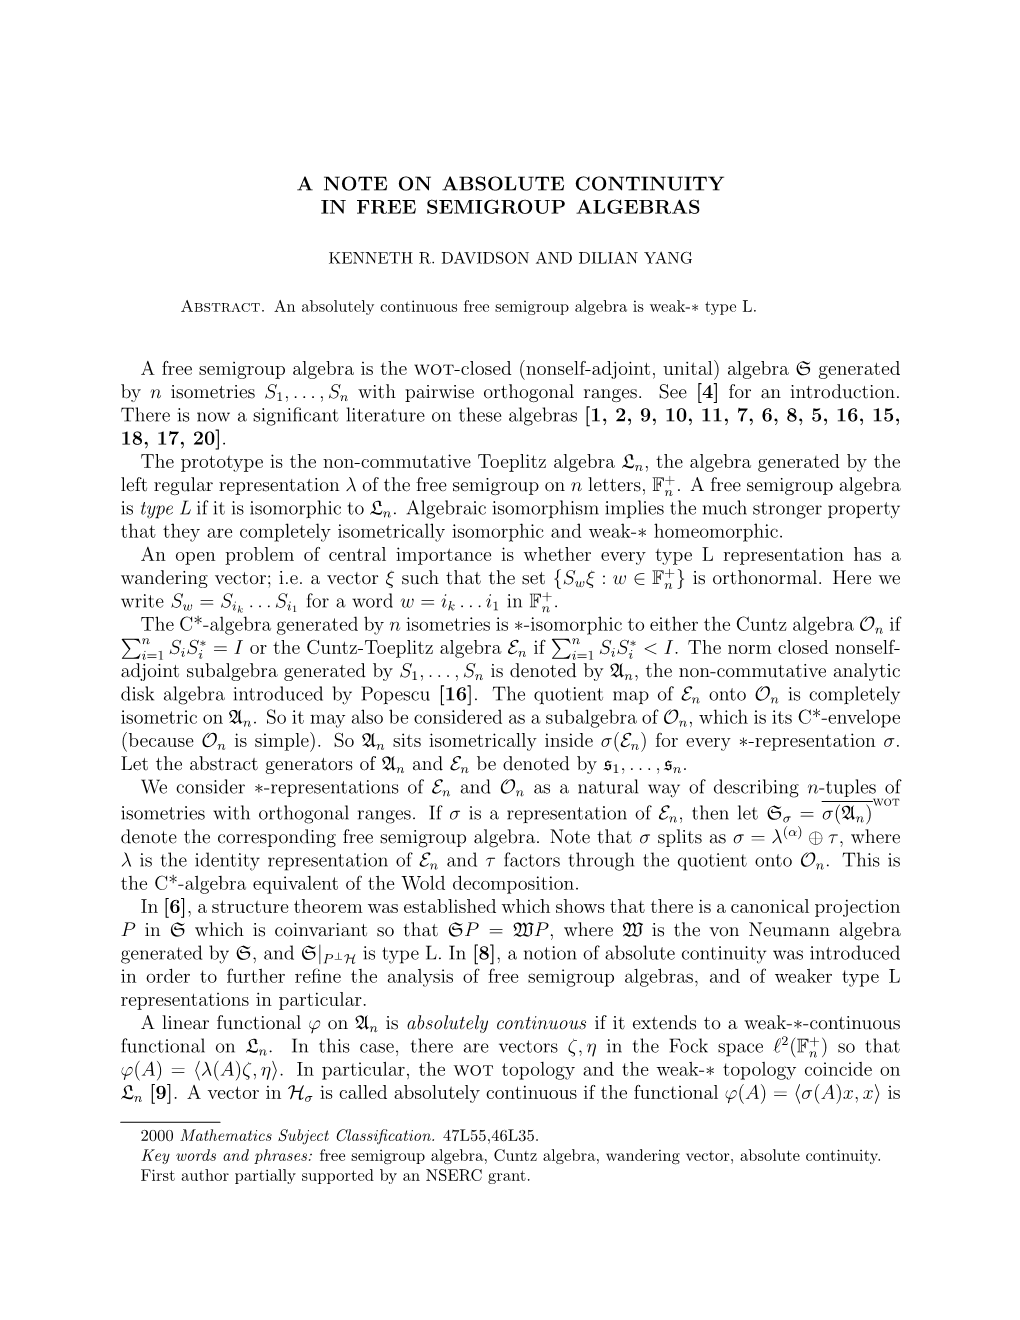 A Note on Absolute Continuity in Free Semigroup Algebras